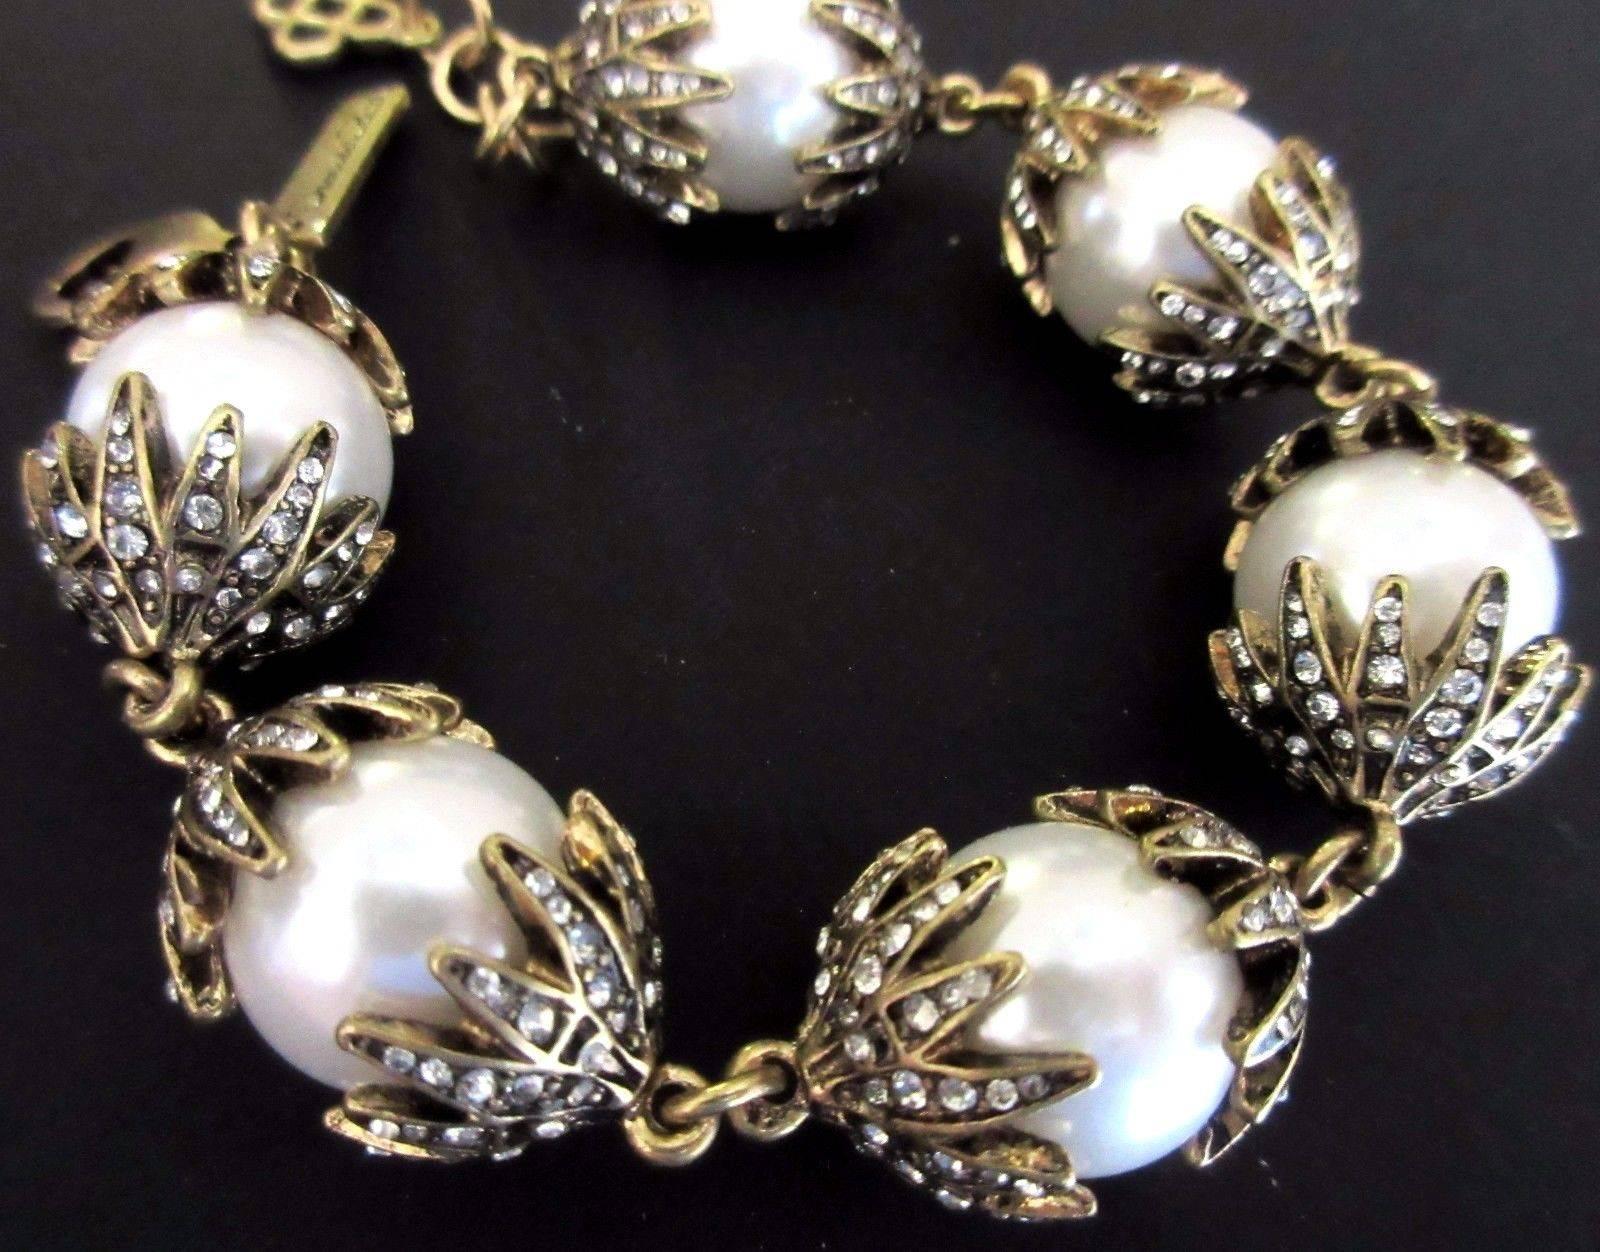 Beautiful Oscar De La Renta Runway Bracelet, comprising Faux Pearl Crown capped Sparkling Crystals. Signed with script Signature hang tag and Iconic Fleur de Lis Charm; Approx. 8 inches long. Add your own Chic Style and Pizzazz to any outfit! 
